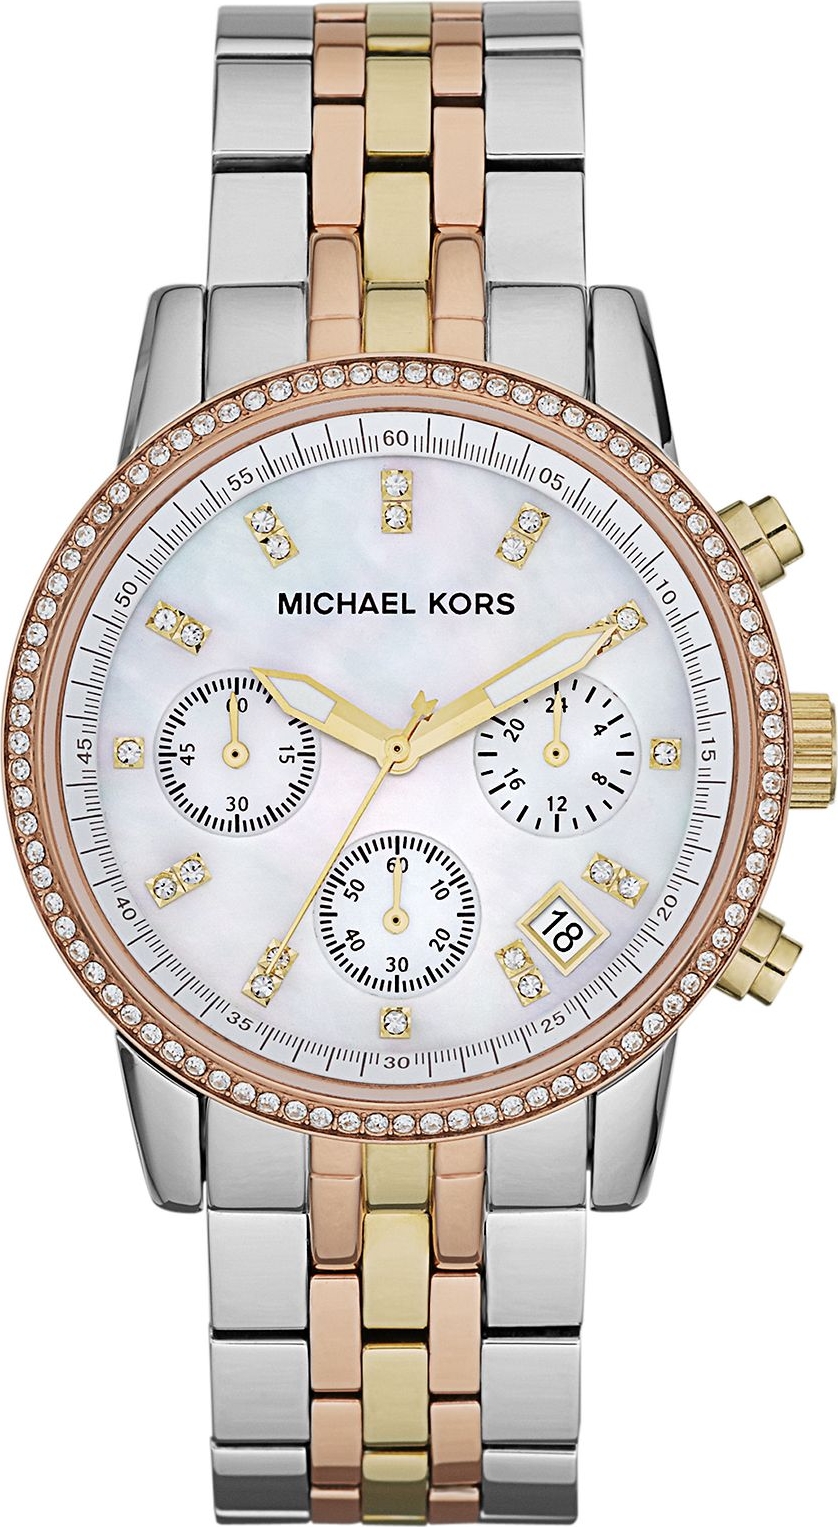 Michael Kors Womens Ritz Stainless Steel Watch with Crystal Topring  Silvergold37mm One Size MK6474  Ritz  Michael Kors Amazonca  Clothing Shoes  Accessories